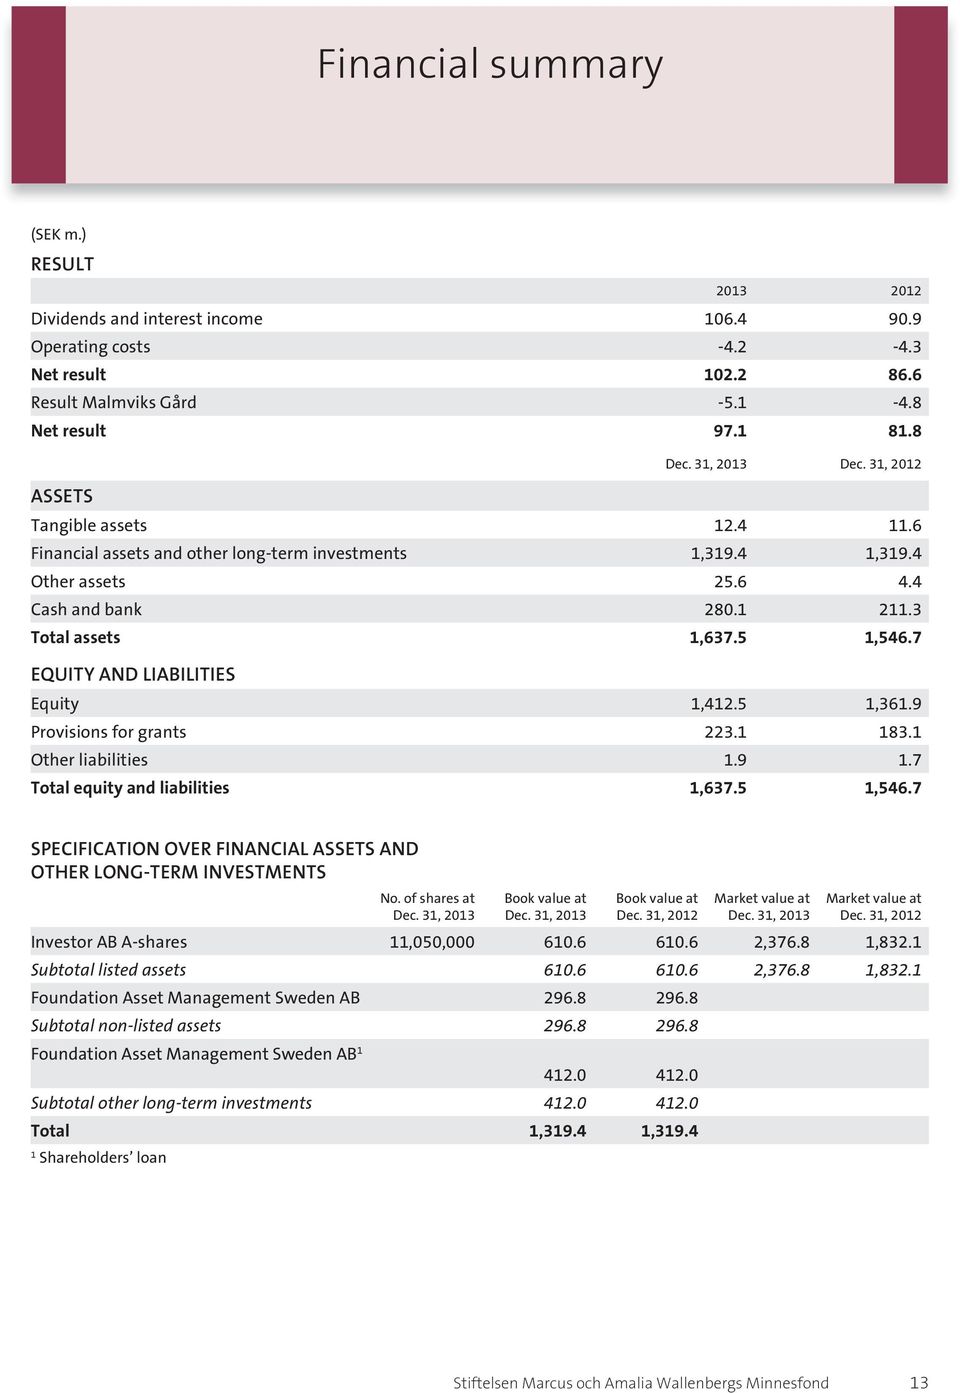 7 EQUITY AND LIABILITIES Equity 1,412.5 1,361.9 Provisions for grants 223.1 183.1 Other liabilities 1.9 1.7 Total equity and liabilities 1,637.5 1,546.